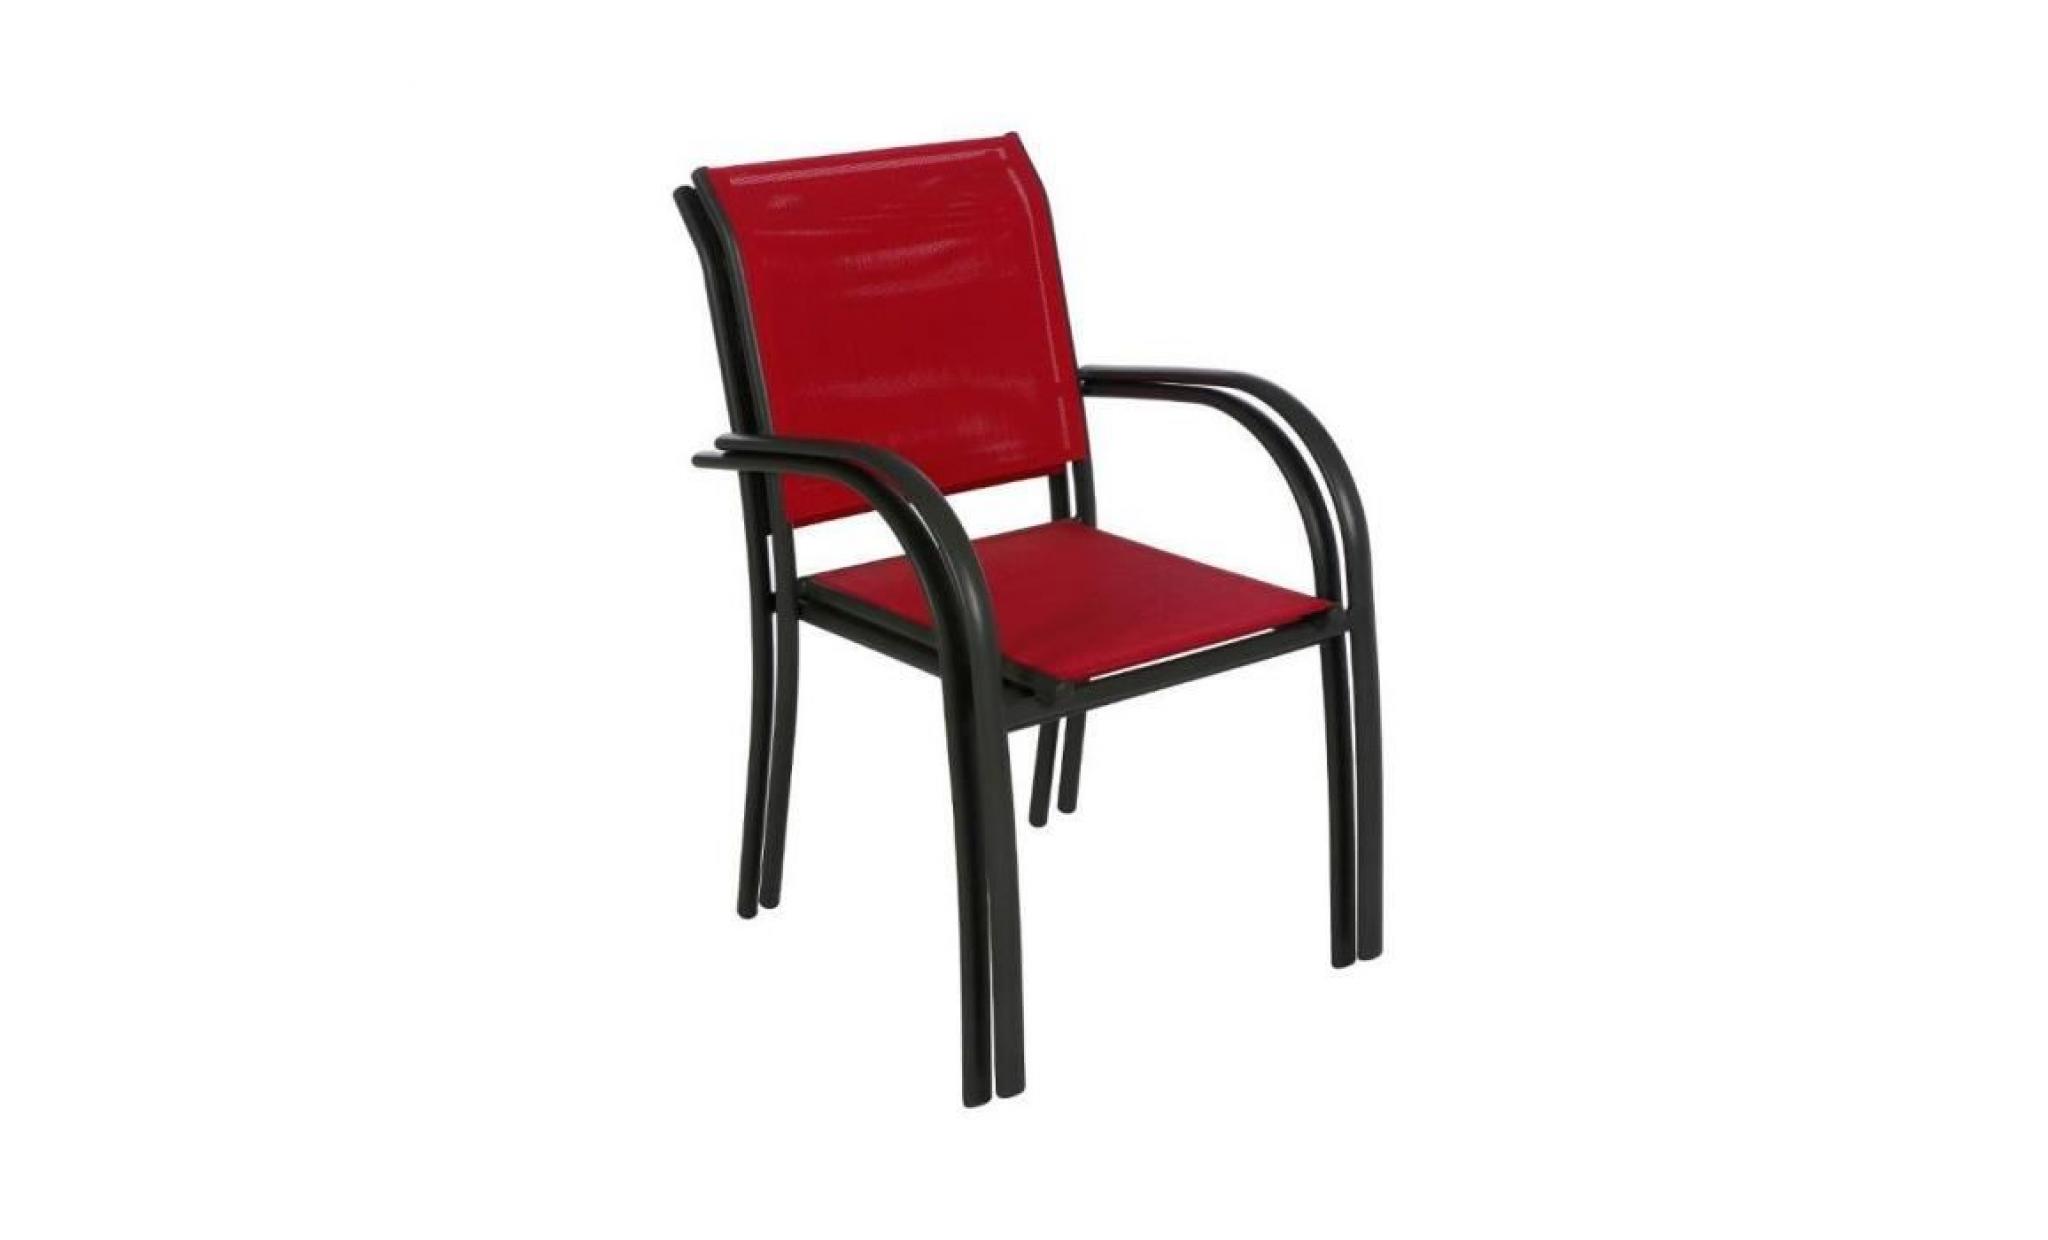 fauteuil piazza hesperide empilable graph/framboise pas cher